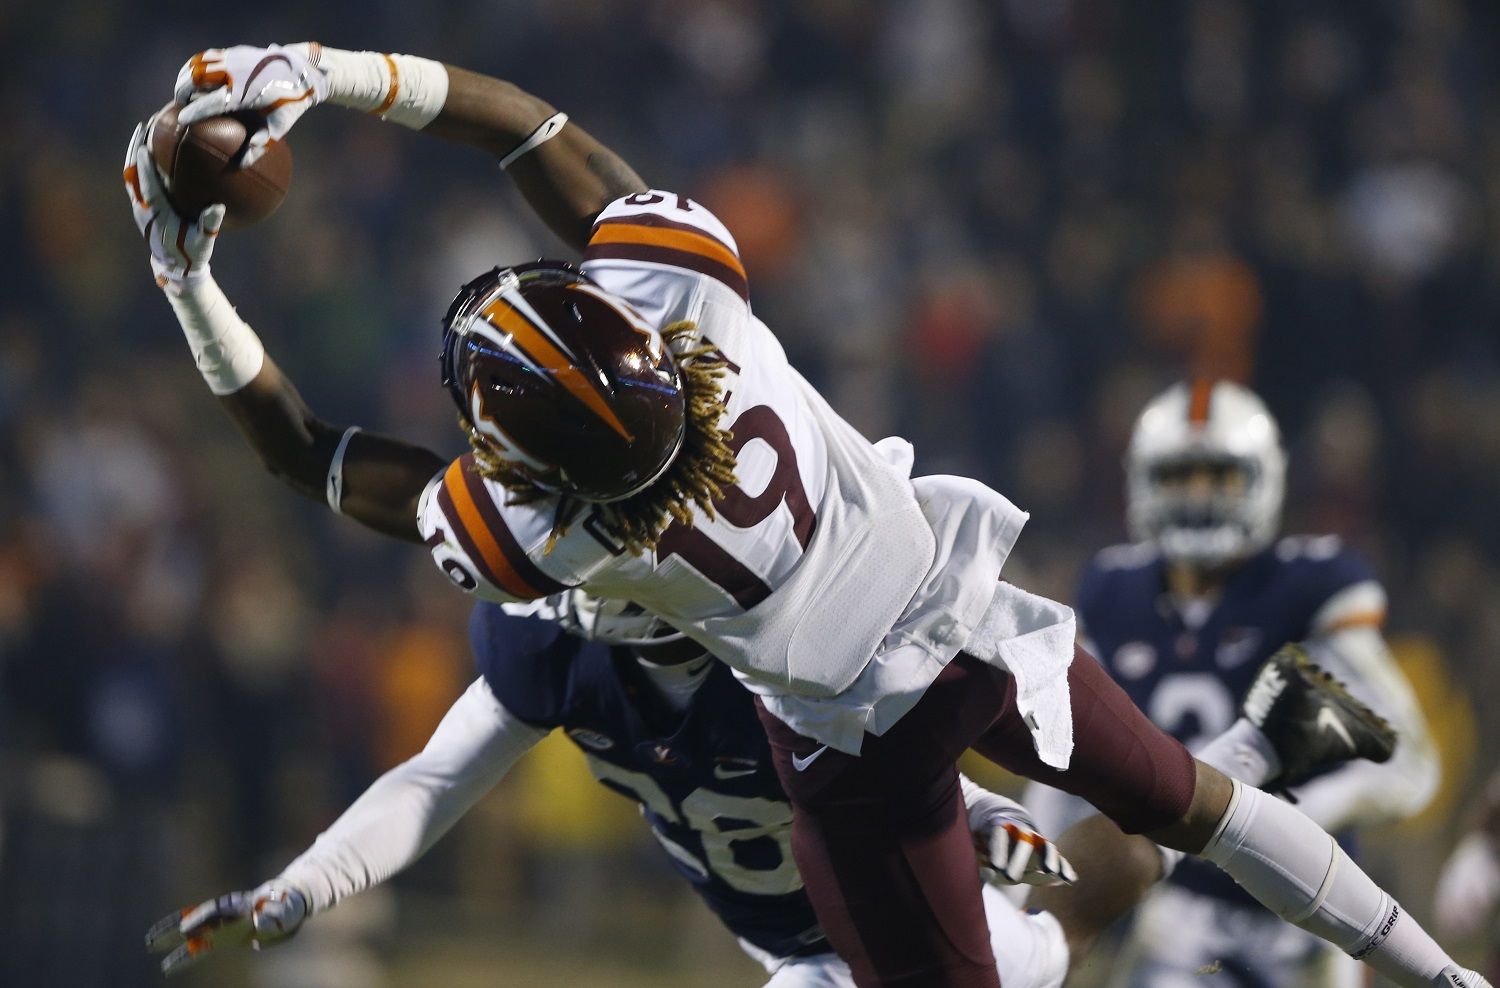 Virginia Tech tight end Drake Deiuliis (9) hauls in a pass in front of Virginia safety Brenton Nelson (28) during the second half of an NCAA college football game in Charlottesville, Va., Friday, Nov. 24, 2017. (AP Photo/Steve Helber)